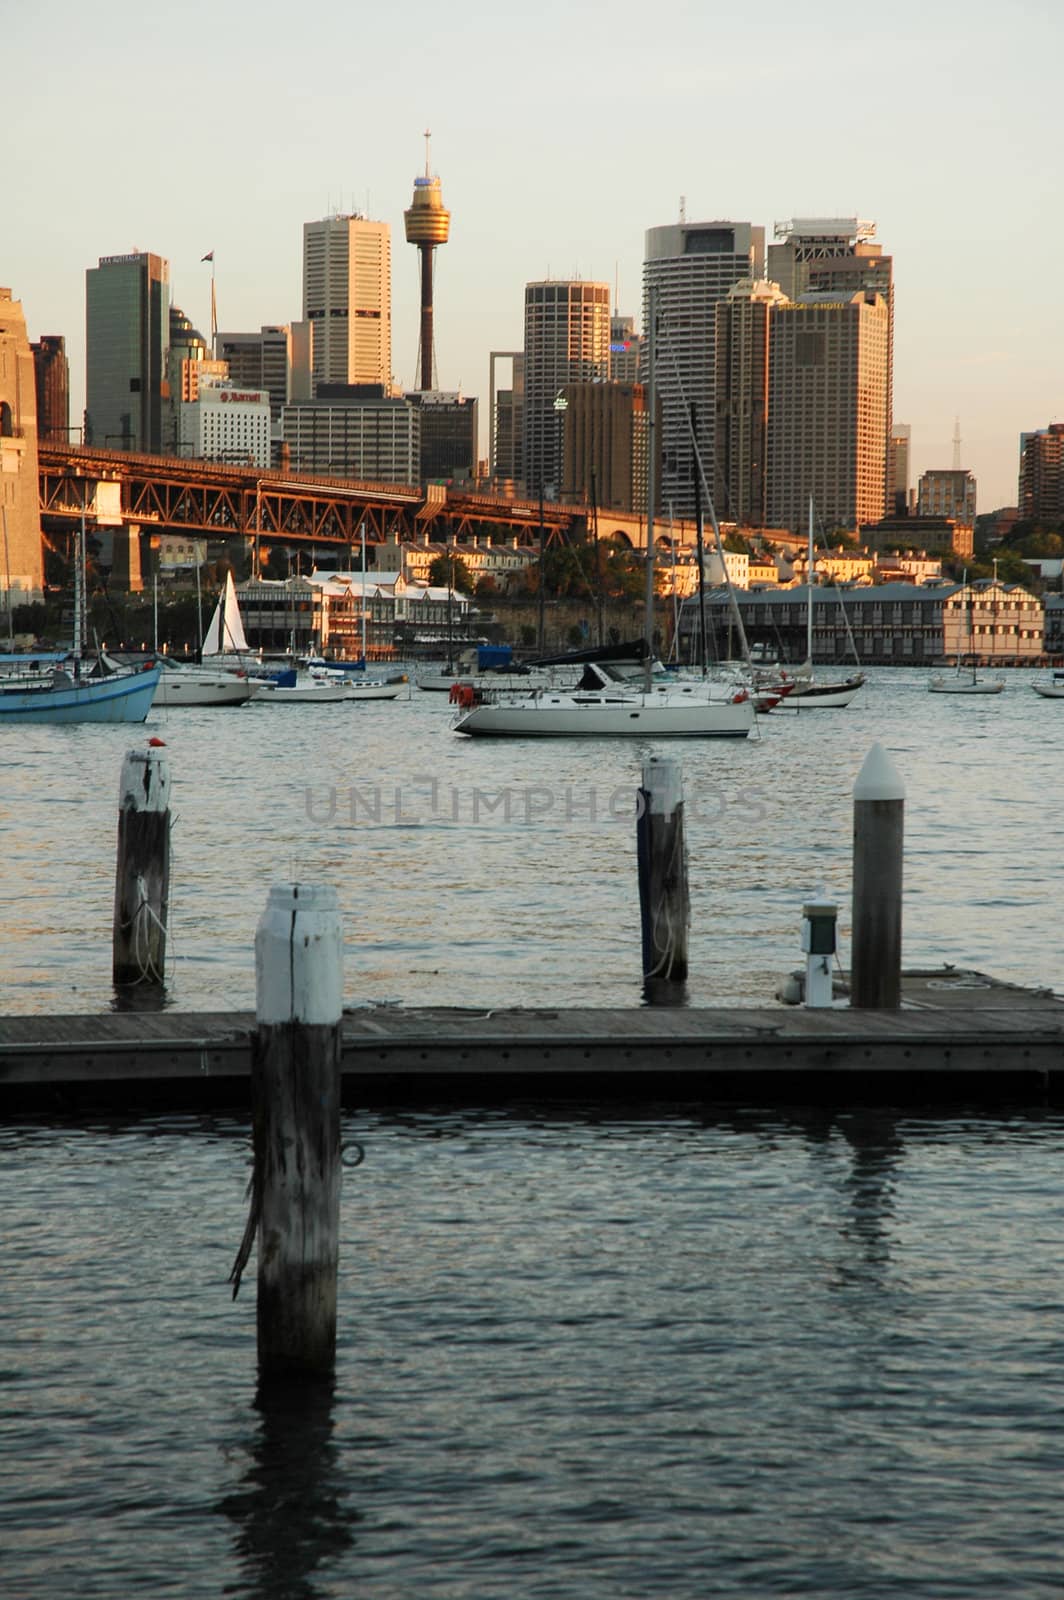 sydney harbour scenery, water, wooden pylons and ships in front, buildings (including sydney tower) in background